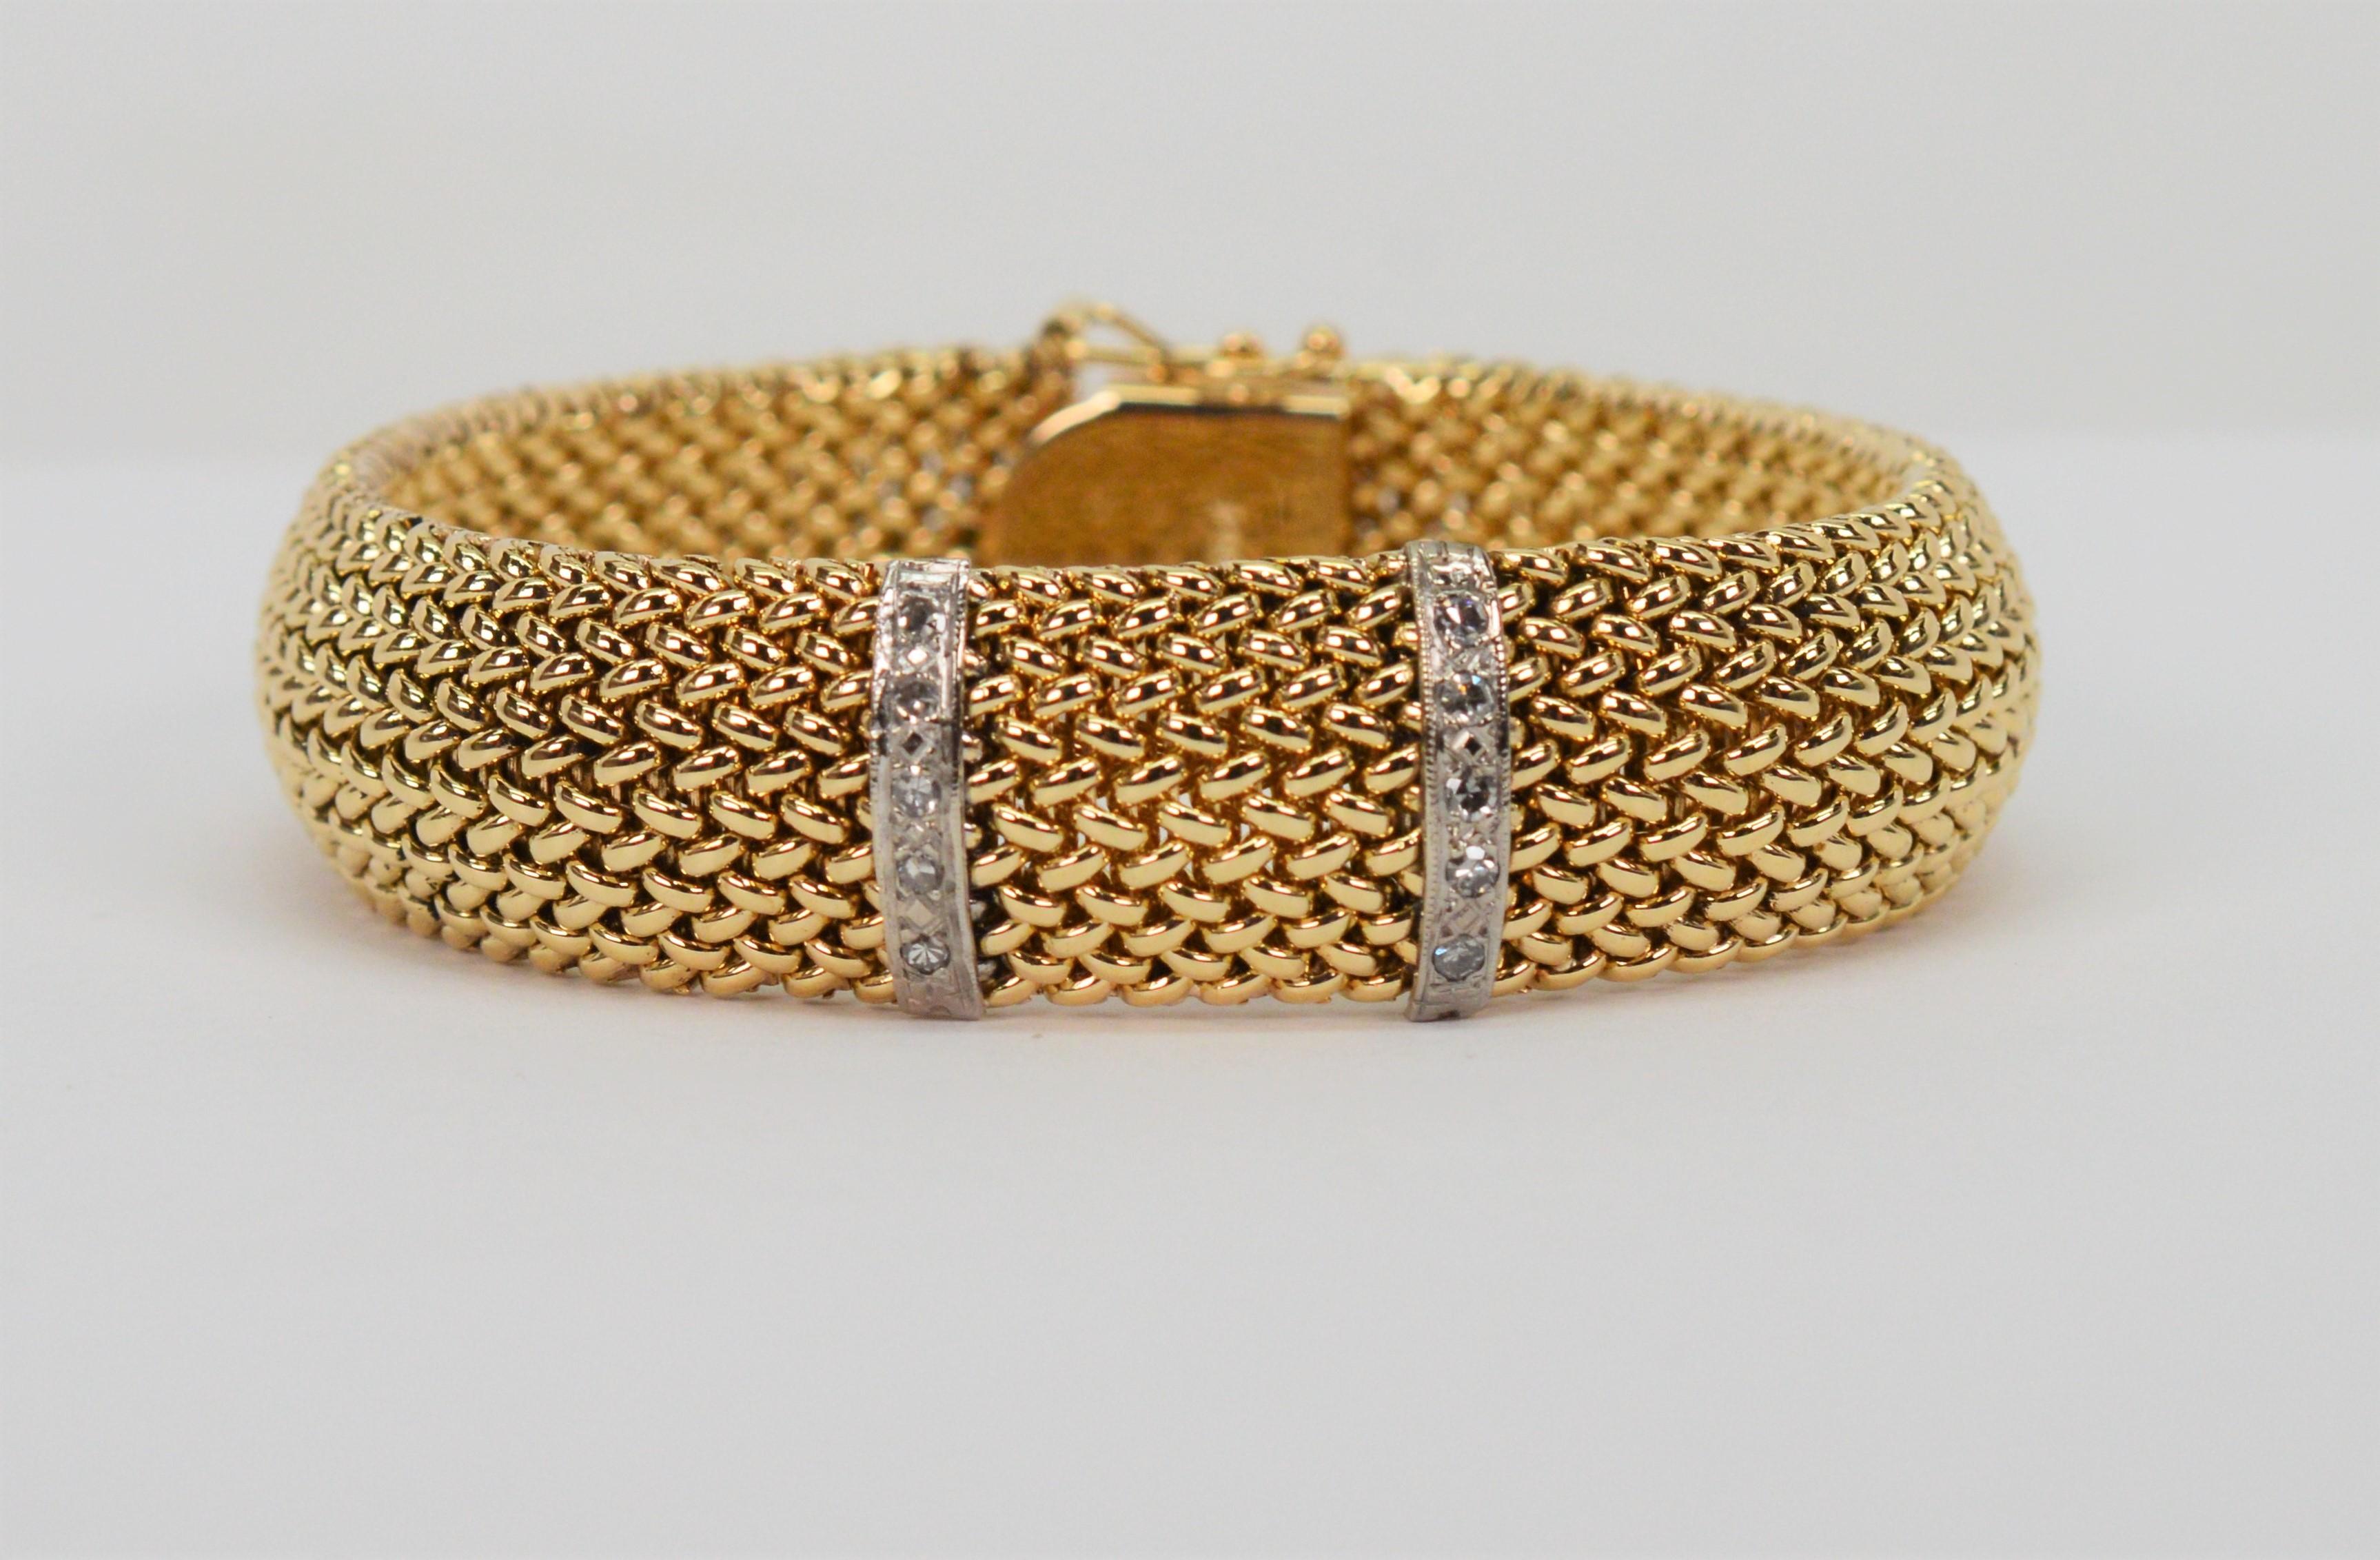 Pleasingly sleek with a touch of sparkle, this fine quality retro style bracelet is certainly on-trend today. Crafted of bright 14 karat yellow gold rounded mesh  with a smooth finish that is attractively contoured and measure one-half inch wide.